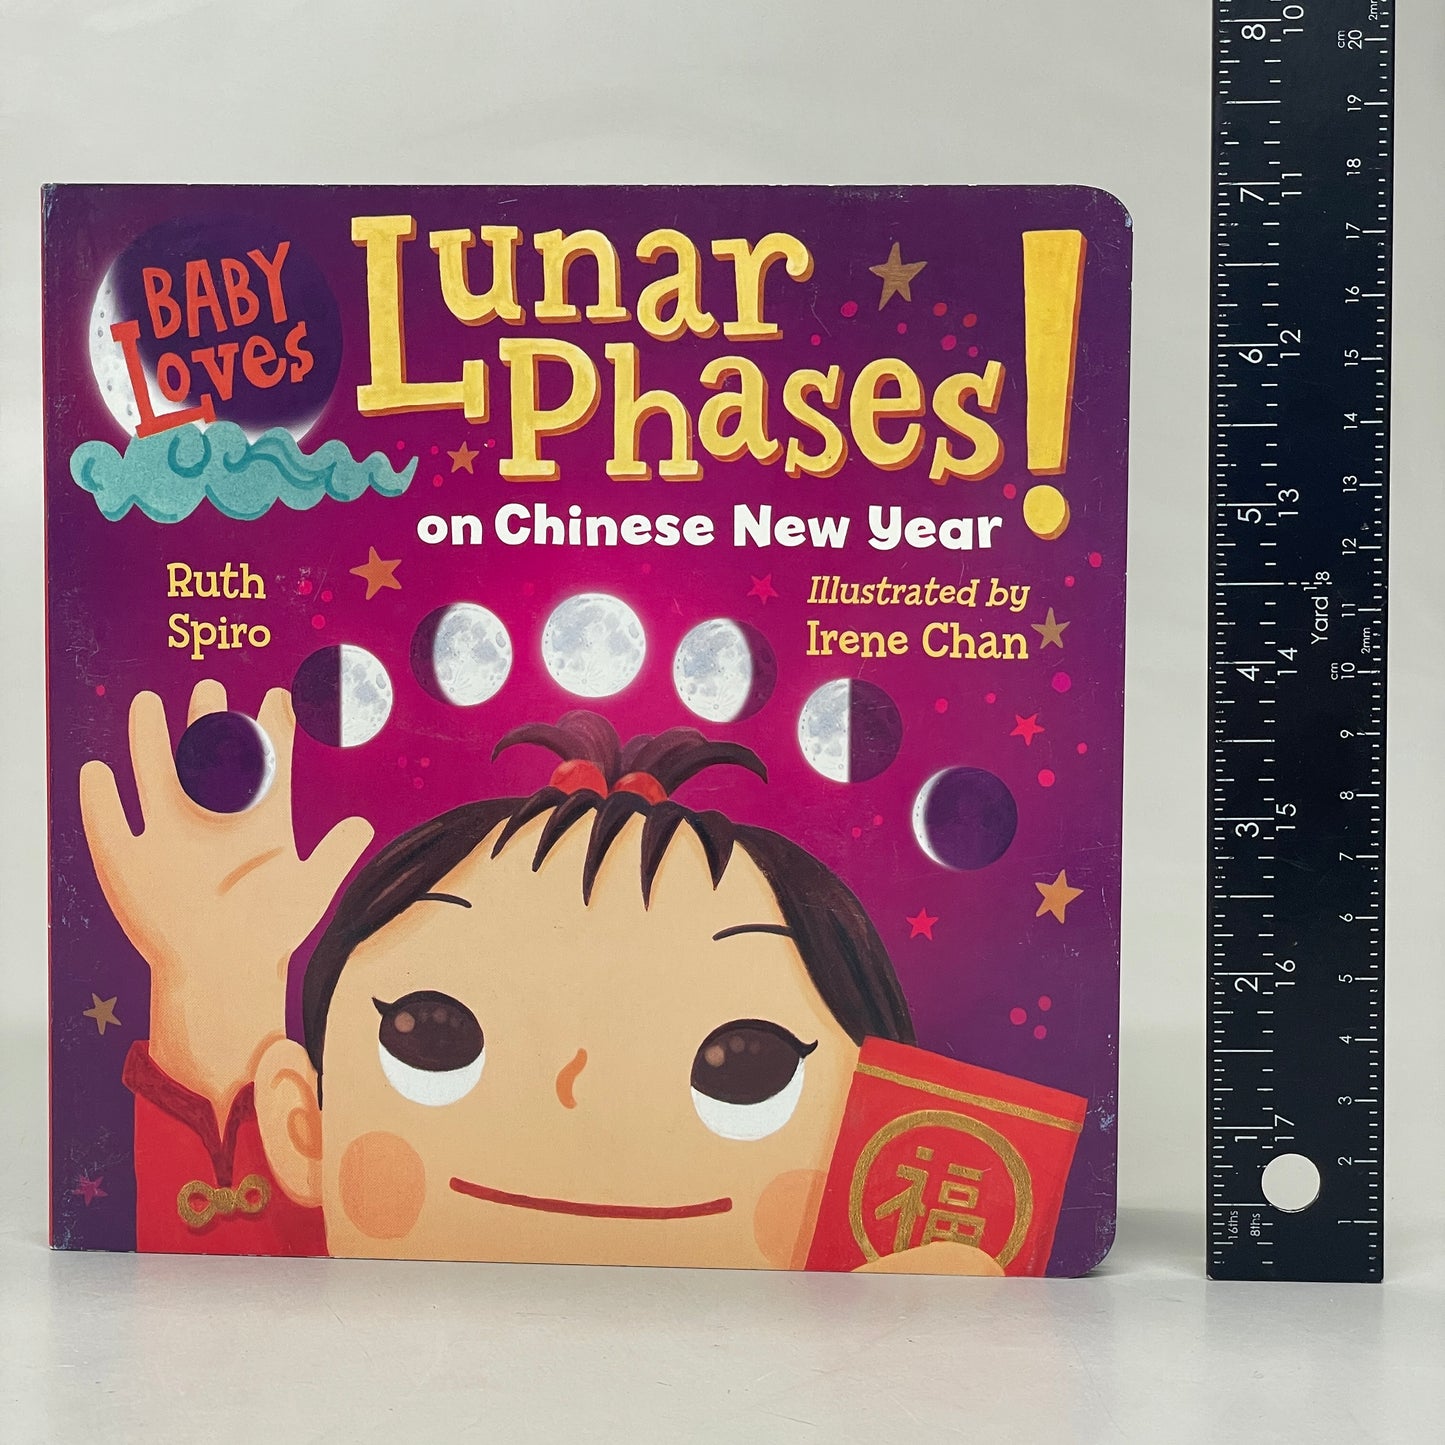 BABY LOVES LUNAR PHASES ON CHINESE NEW YEAR! (Lot of 7) By Ruth Spiro